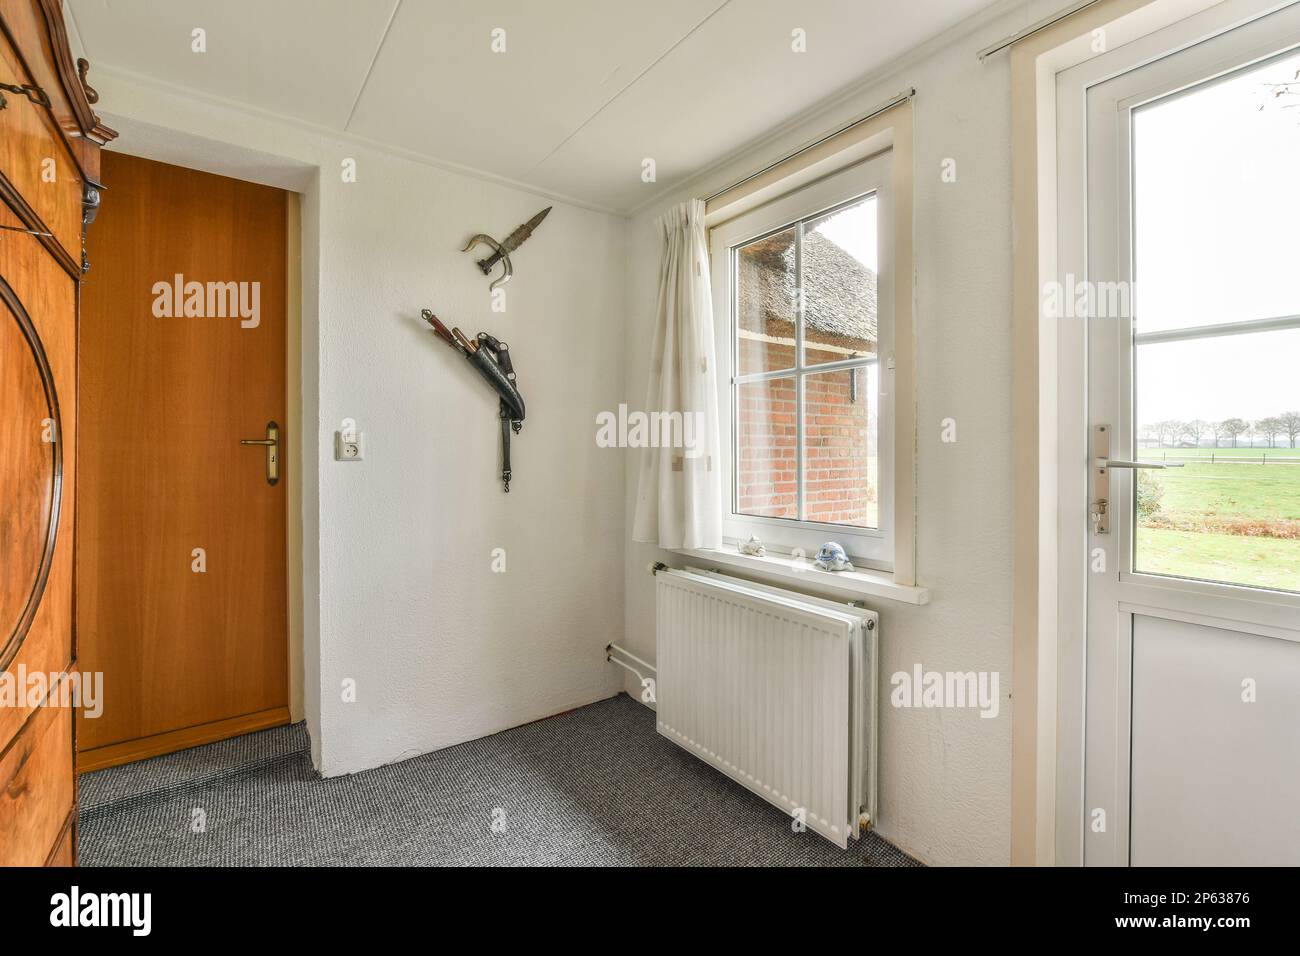 a door and window in a room with wood paneled walls, grey flooring and white trim on the doors Stock Photo